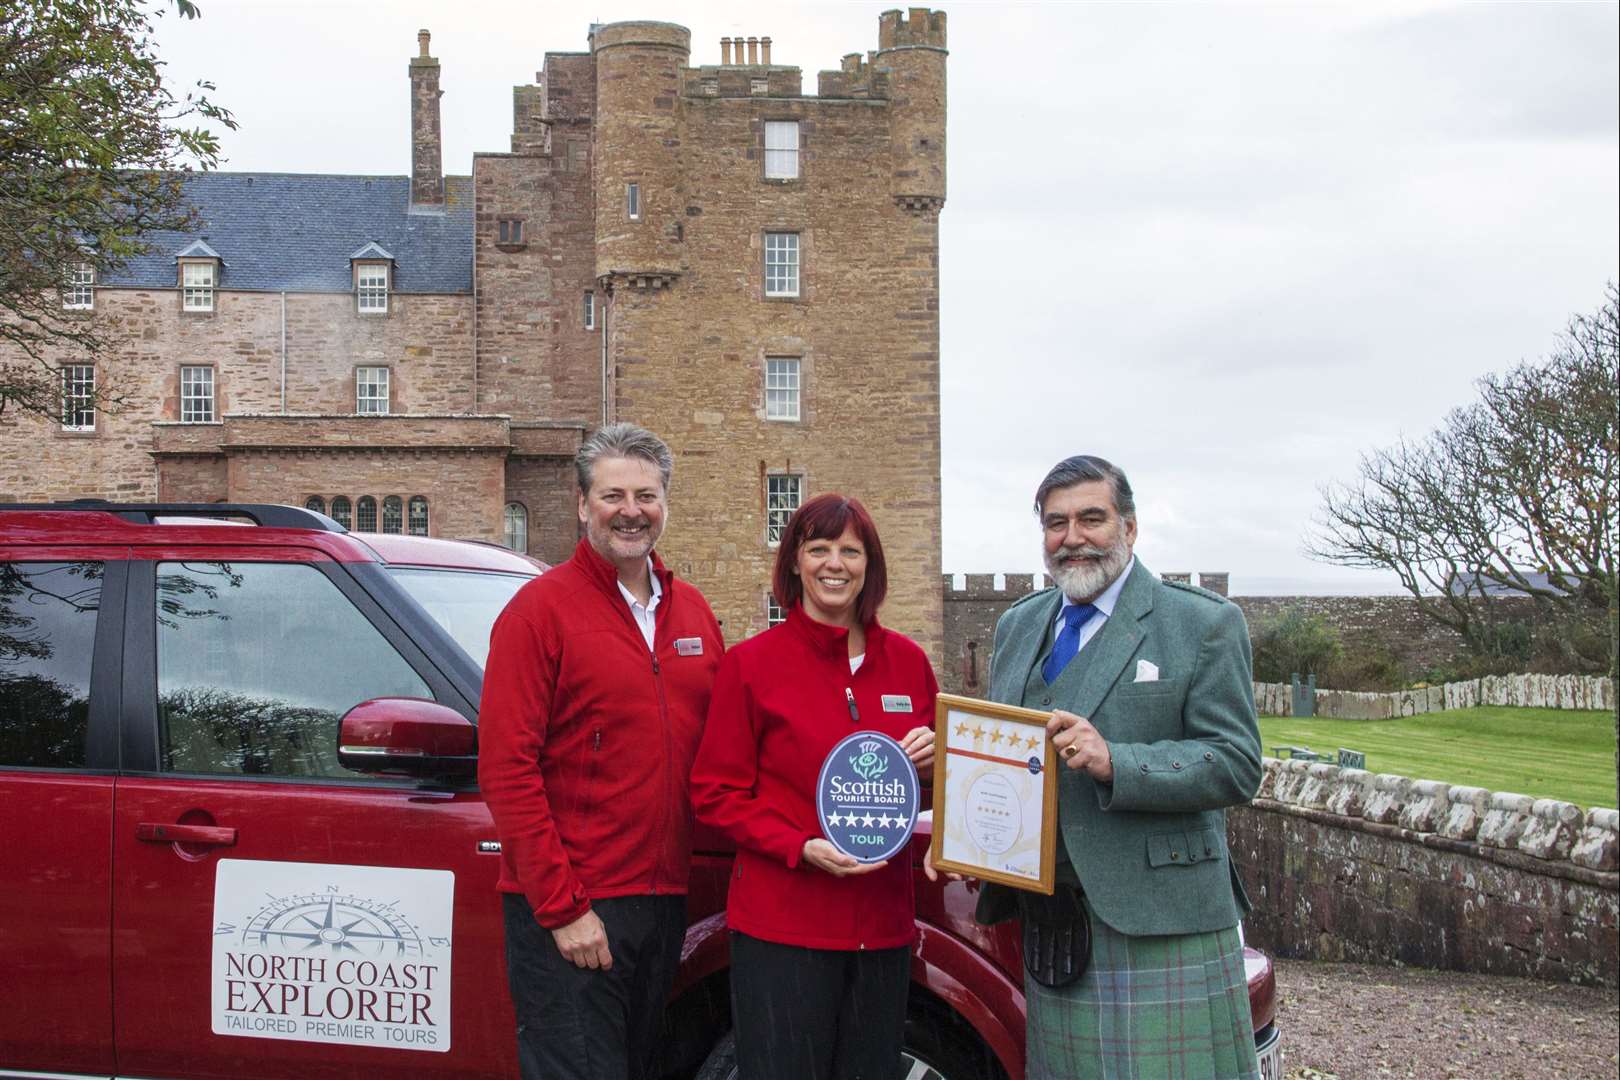 VisitScotland chairman Lord Thurso presenting the quality assurance award to Robert and Sally-Ann James of North Coast Explorer Tours.